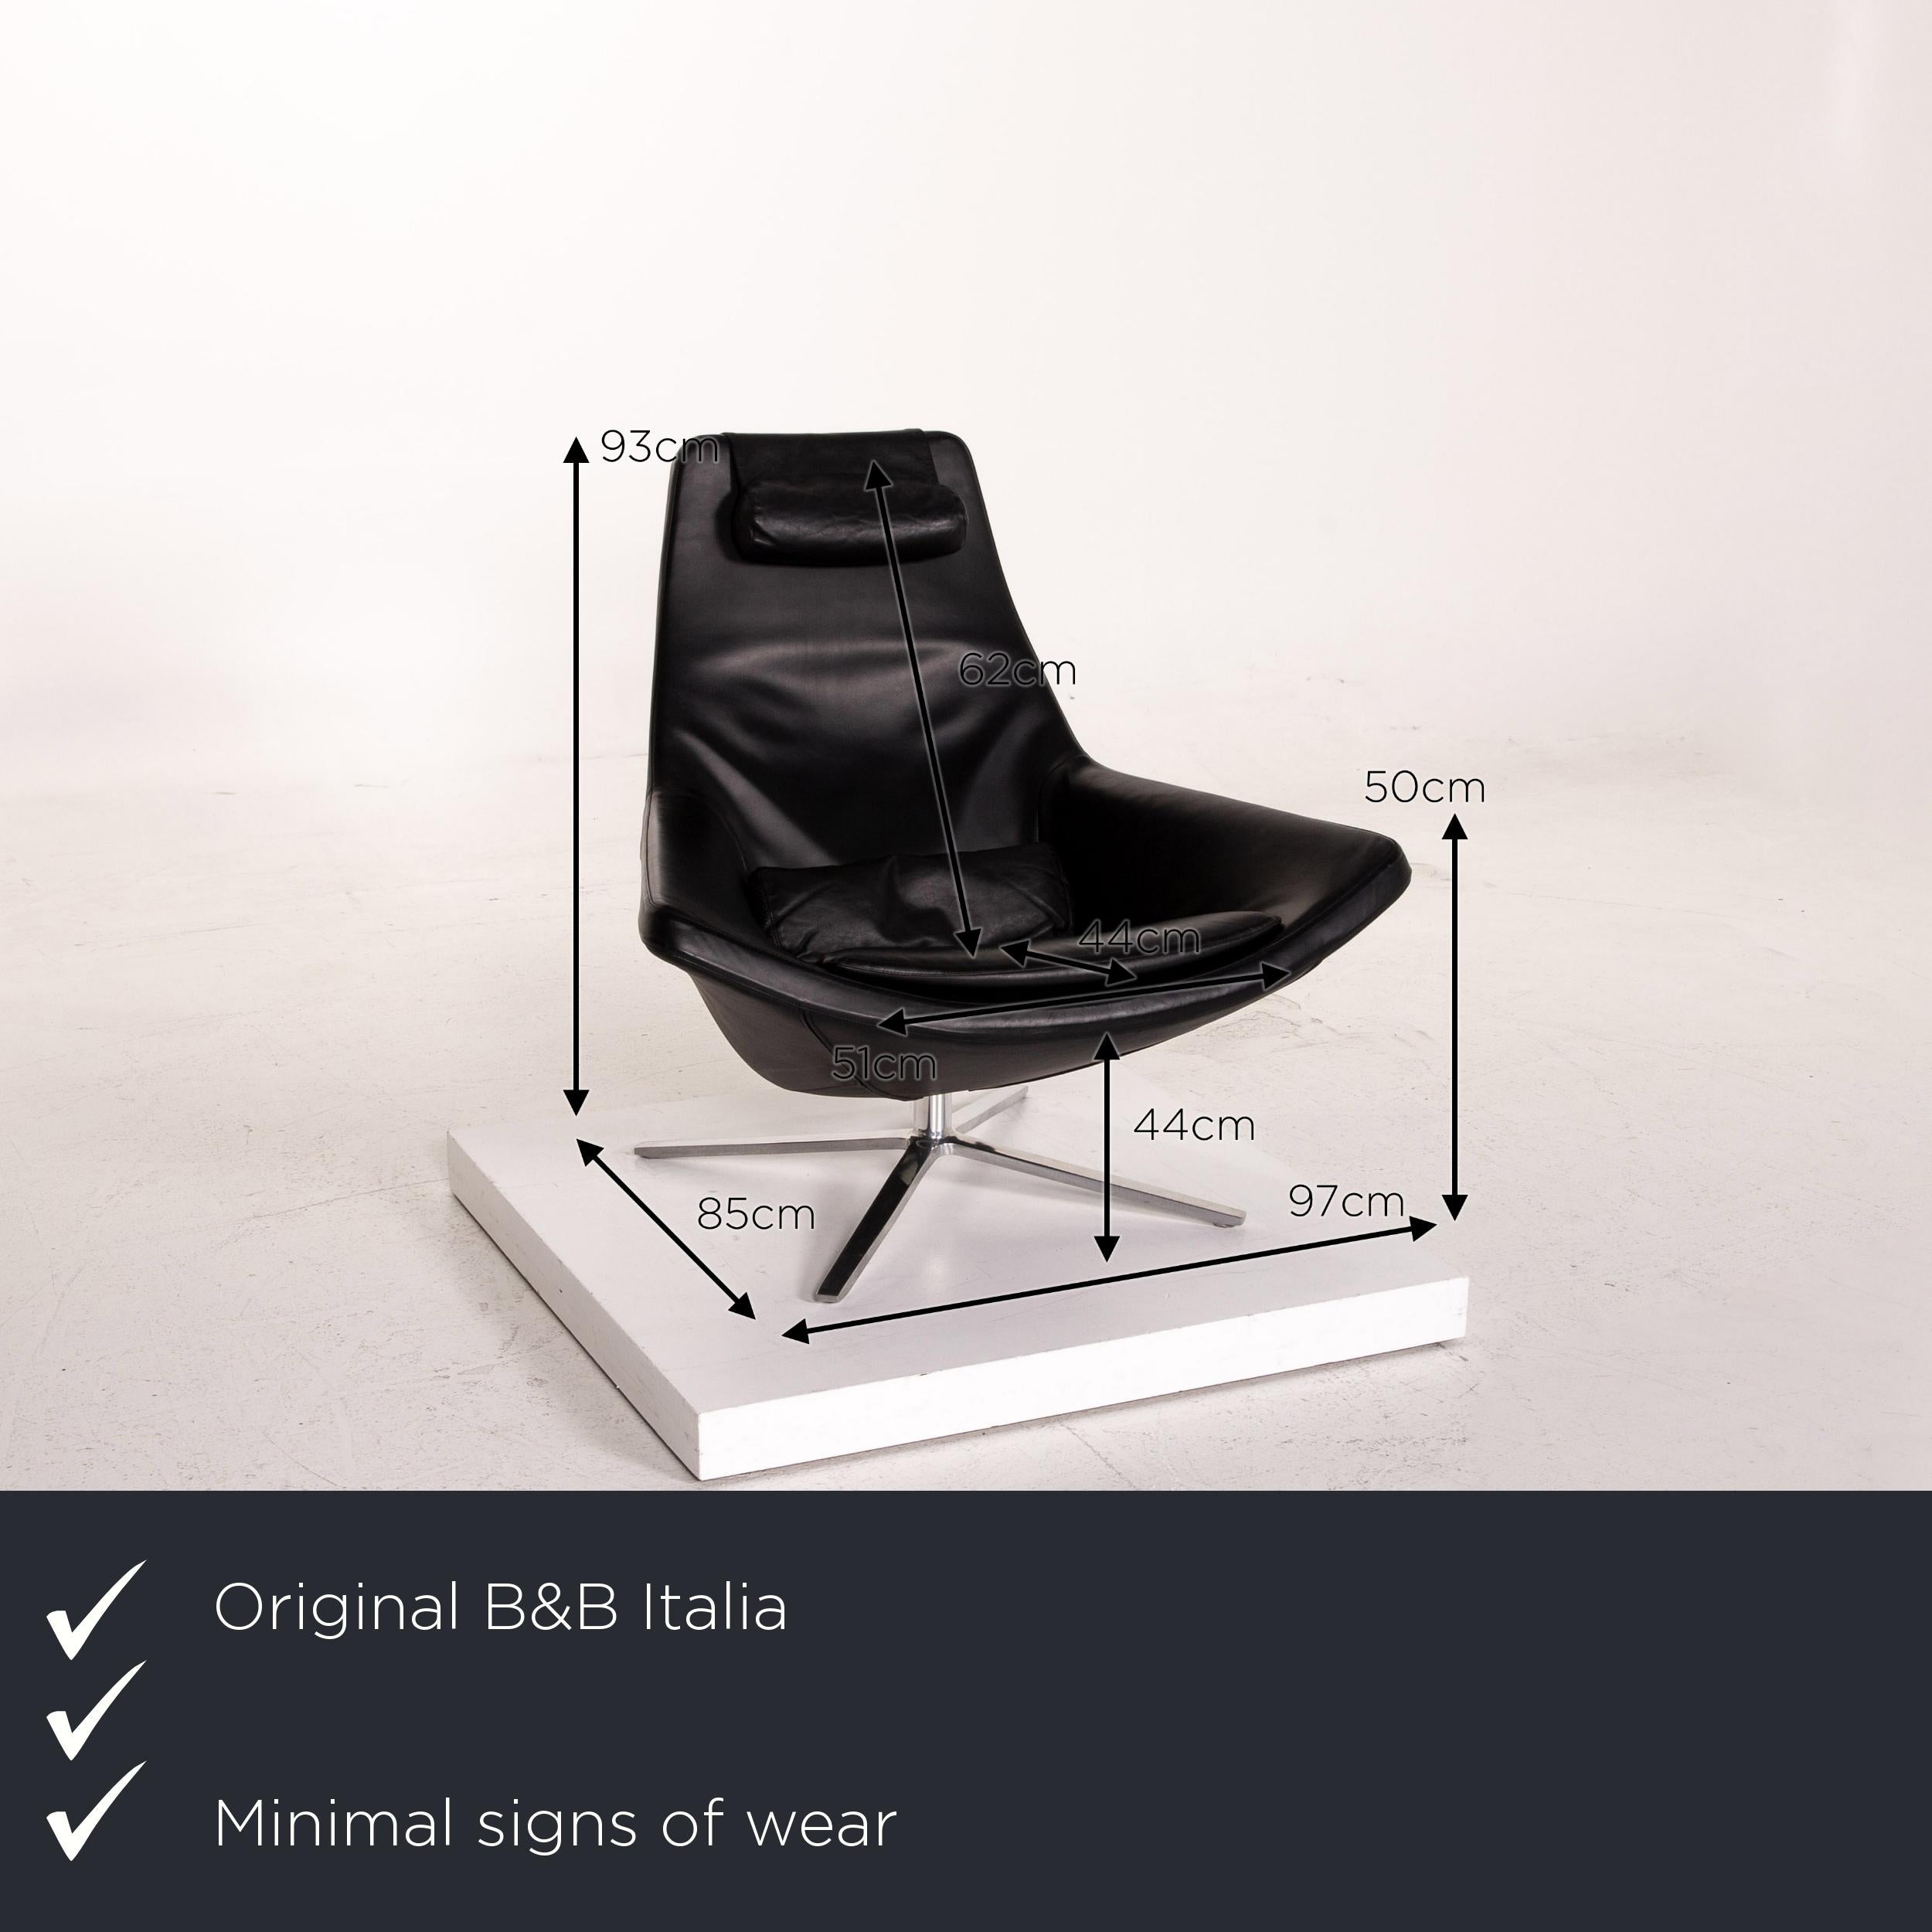 We present to you a B&B Italia Metropolitan leather armchair black incl. Stool.
  
 

 Product measurements in centimeters:
 

 depth: 85
 width: 97
 height: 93
 seat height: 44
 rest height: 50
 seat depth: 44
 seat width: 51
 back